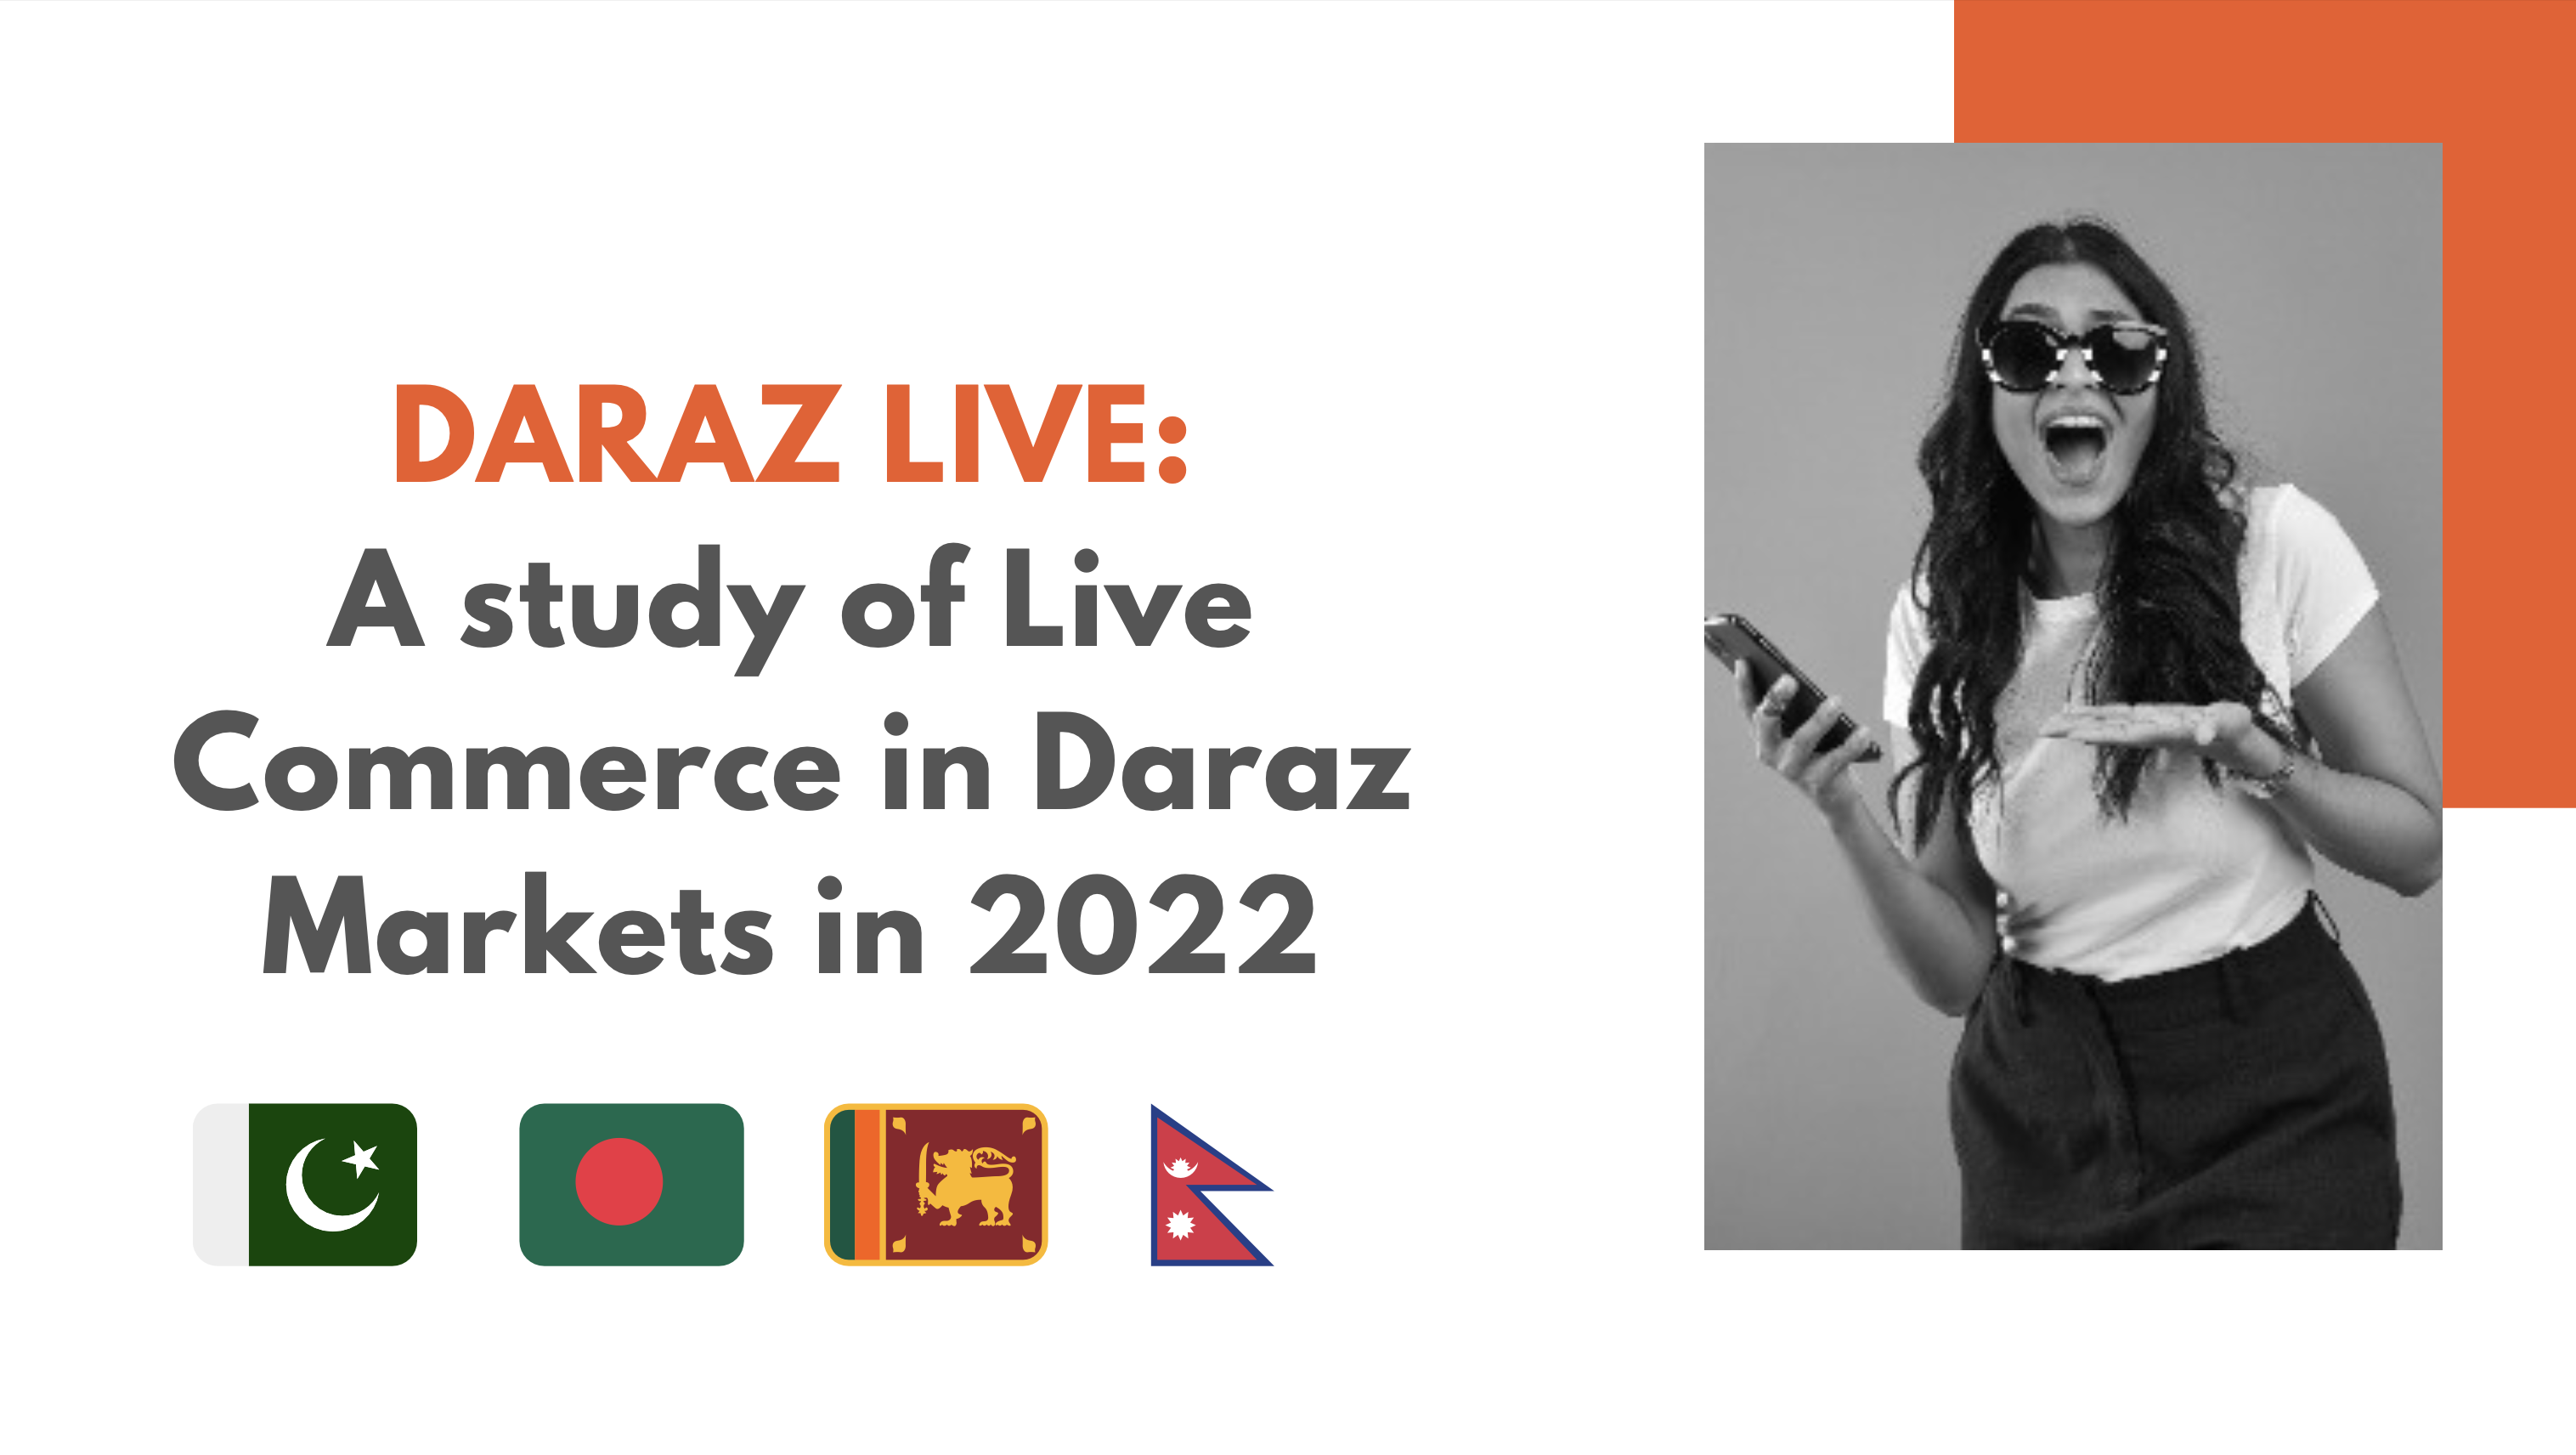 Over 1.2 million orders were influenced by Daraz Live campaigns and streams in 2022 — Daraz